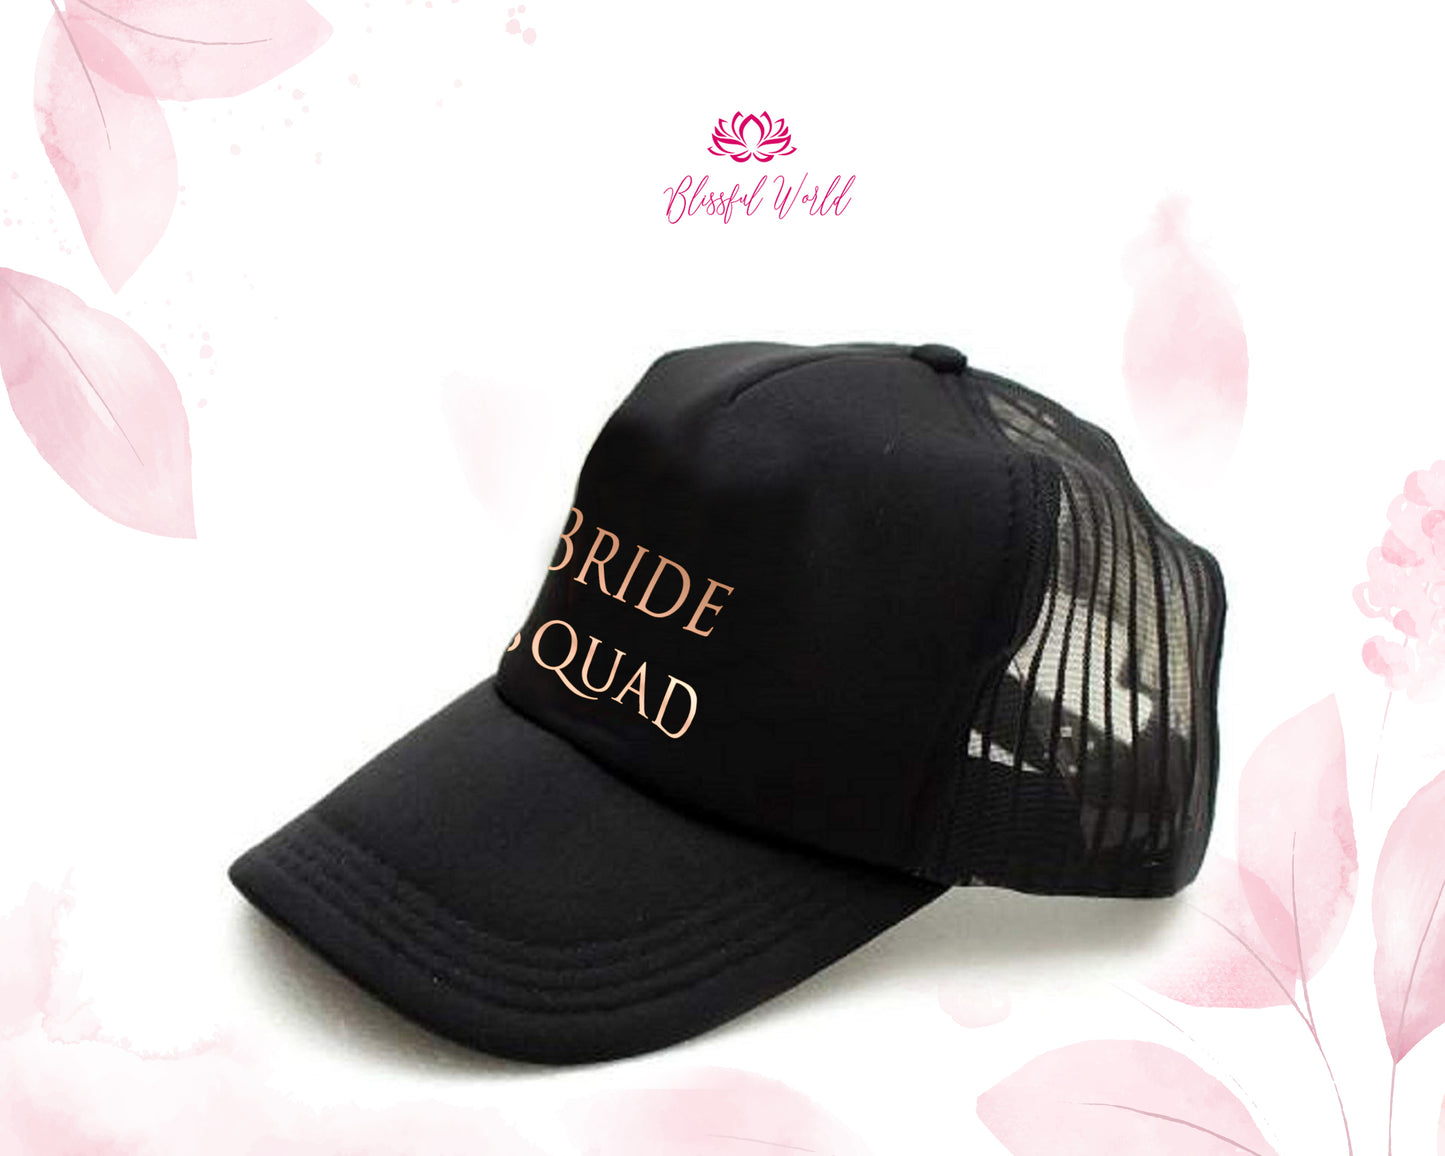 Bride Hat, Bachelorette Party Cap Bride Cap Bridal Caps Bridesmaid Caps Bride and Babe Hat, Just Married, Wife, Wedding, Couples, Hubby, Wifey, Party Hat, Bridesmaid, Bachelorette Embroidered Dad Caps